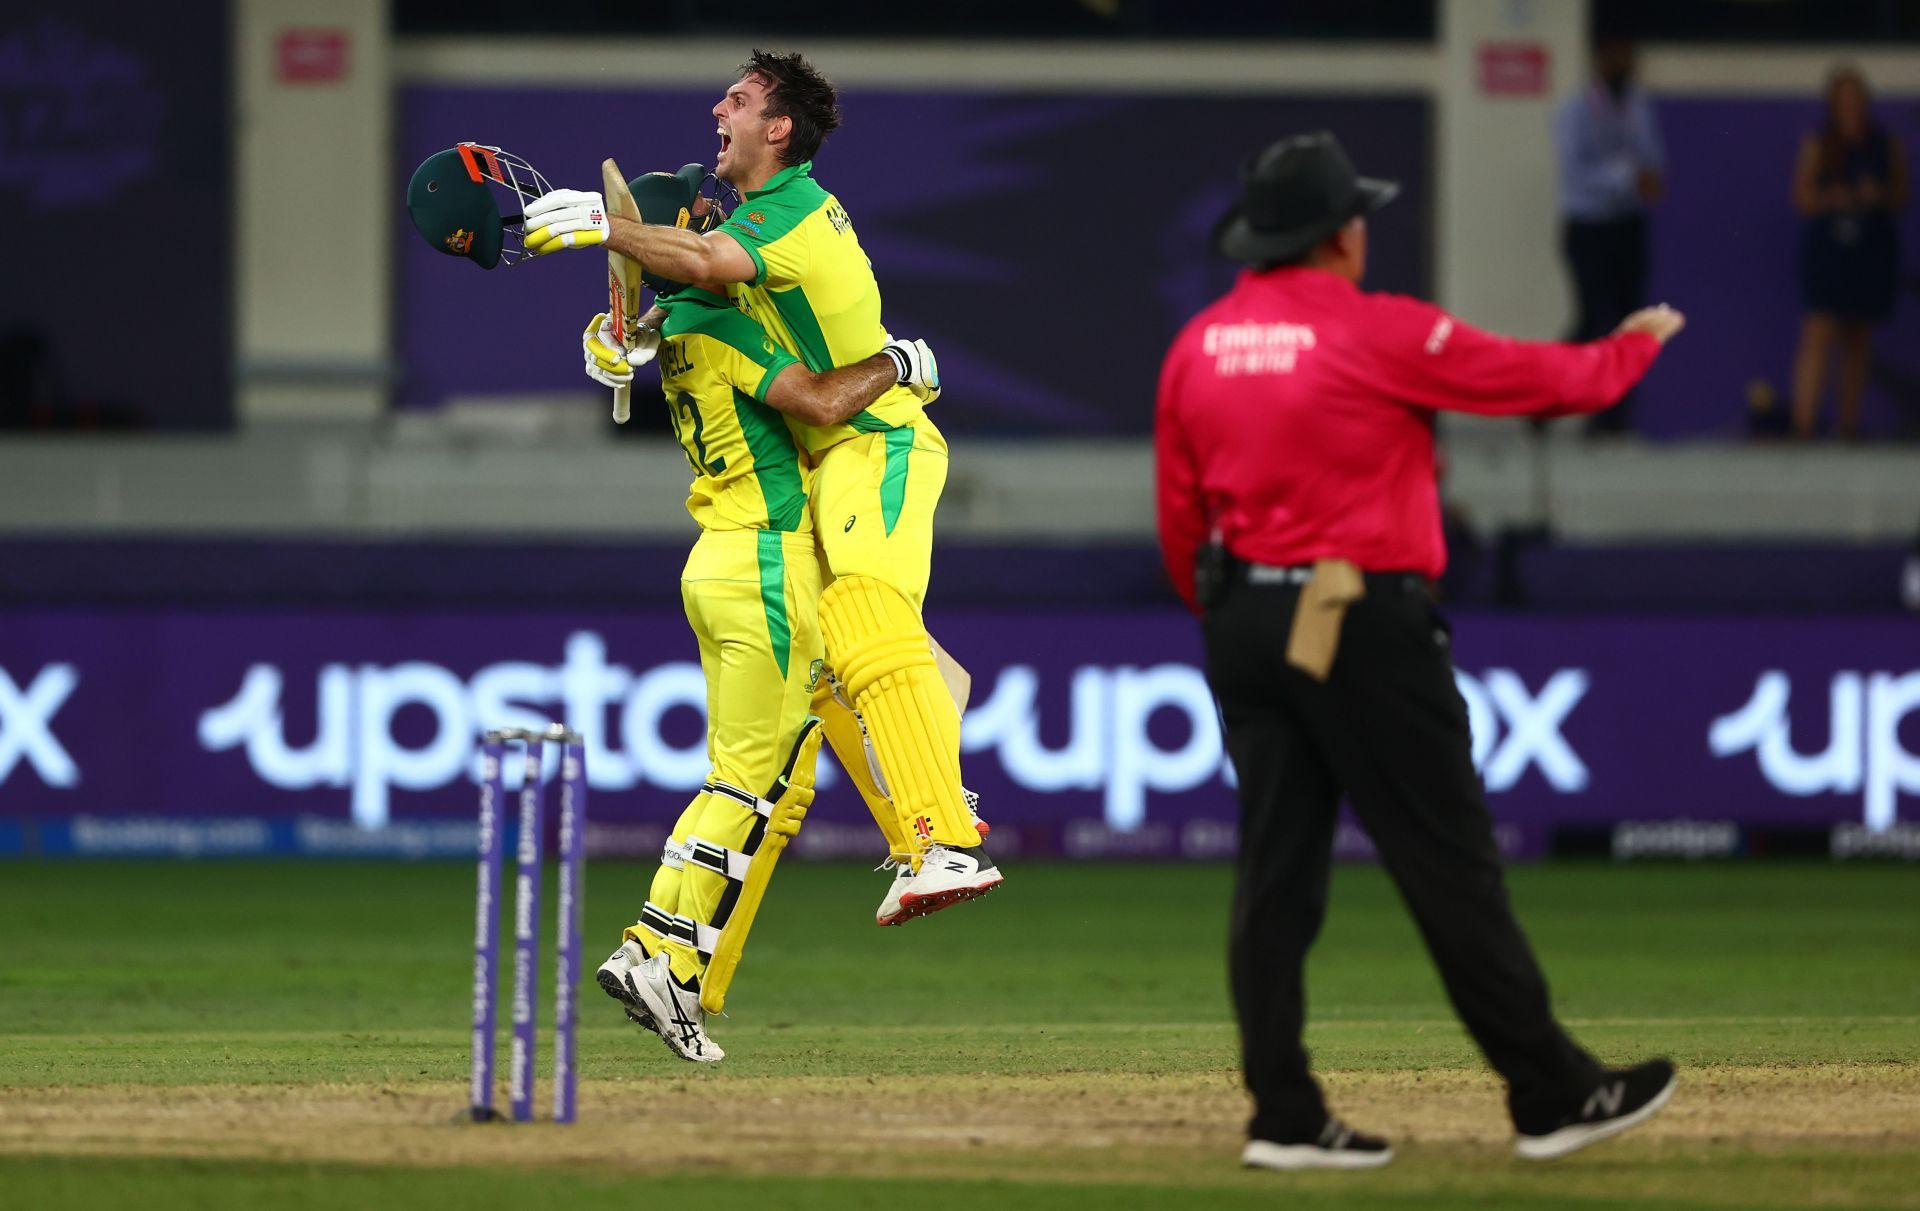 Australia win their maiden T20 World Cup title (Credit: Getty Images)